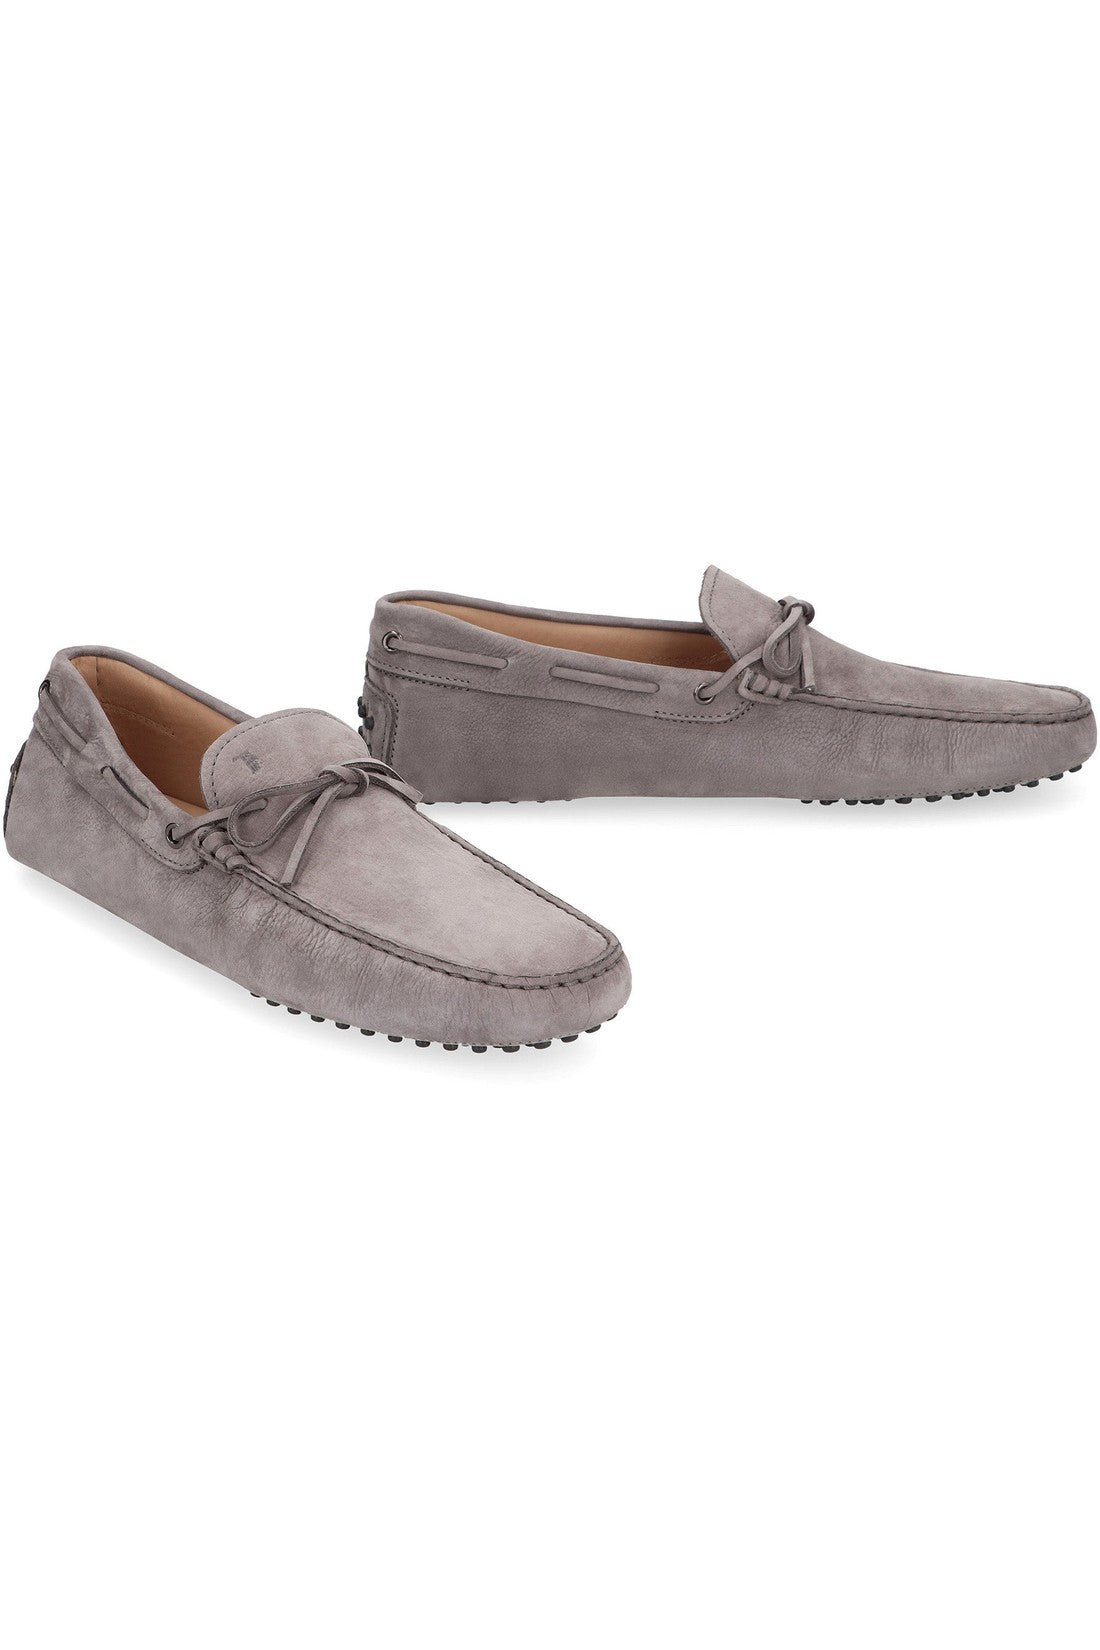 Tod's-OUTLET-SALE-Suede loafers-ARCHIVIST